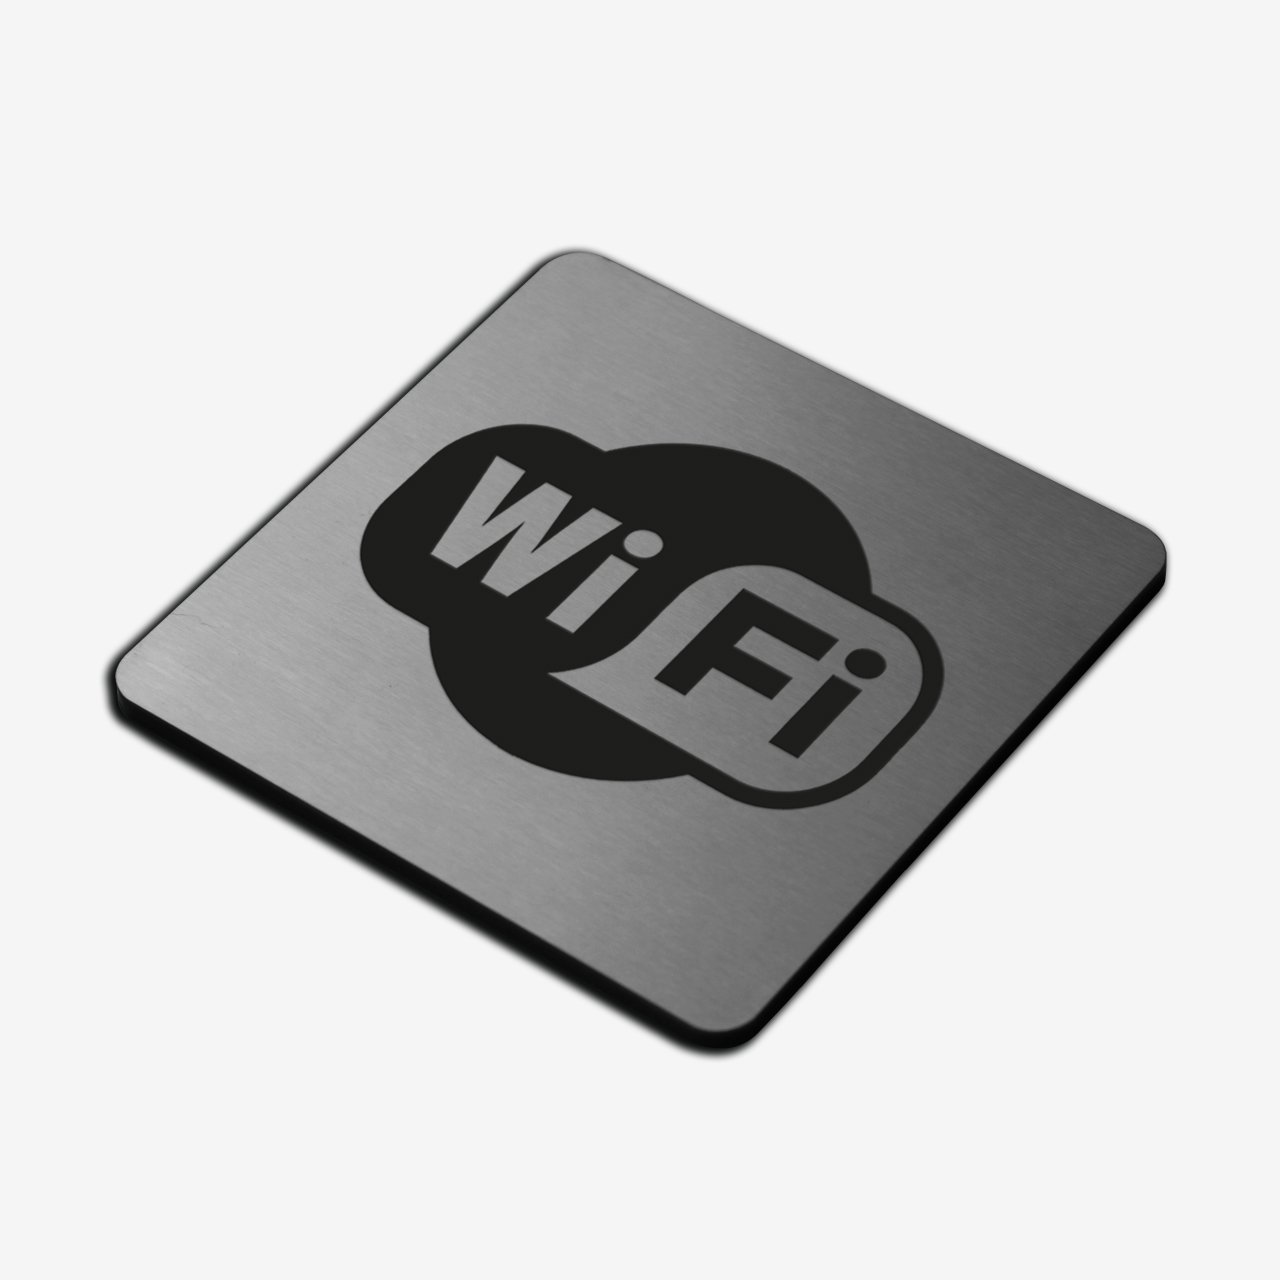 Wi-Fi Zone - Stainless Steel Sign Information signs square Bsign